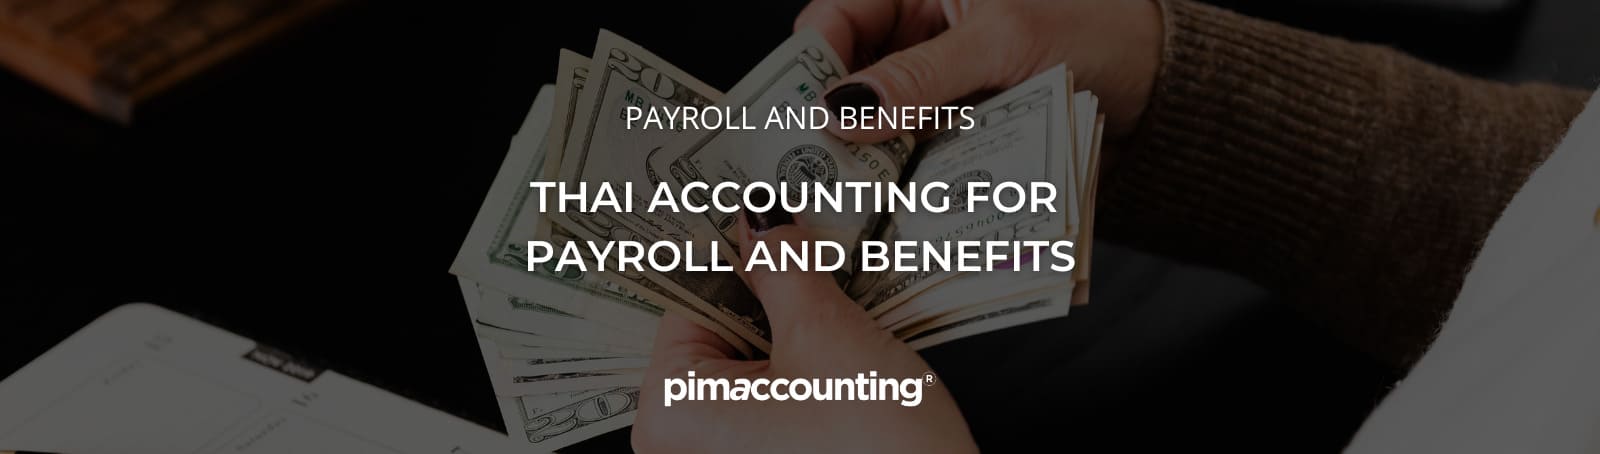 Thai Accounting for Payroll and Benefits